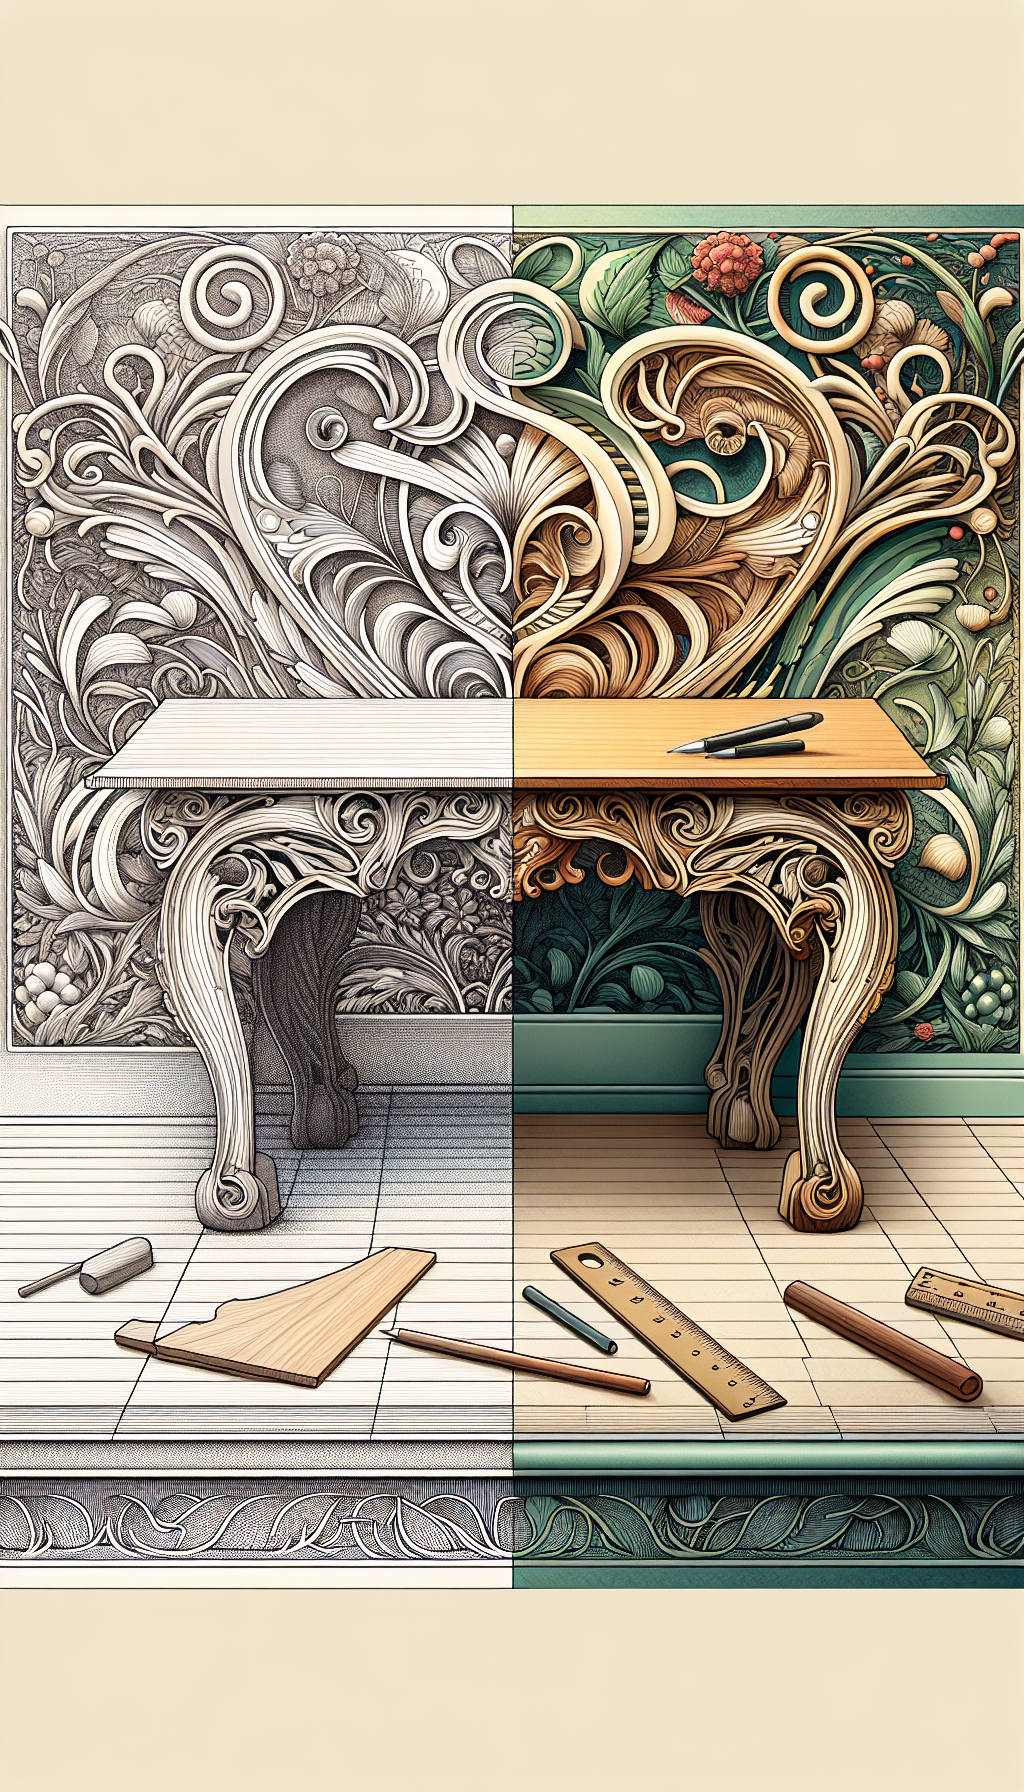 An illustration showcasing half of an ornate Art Nouveau table with intricate floral carvings gently morphing into a minimalist Shaker-style table with clean lines and functional form. On the Nouveau side, a magnifying glass hovers, highlighting details, while on the Shaker half, a ruler rests, underscoring simplicity. The background subtly transitions from elaborate patterns to solid, muted colors.